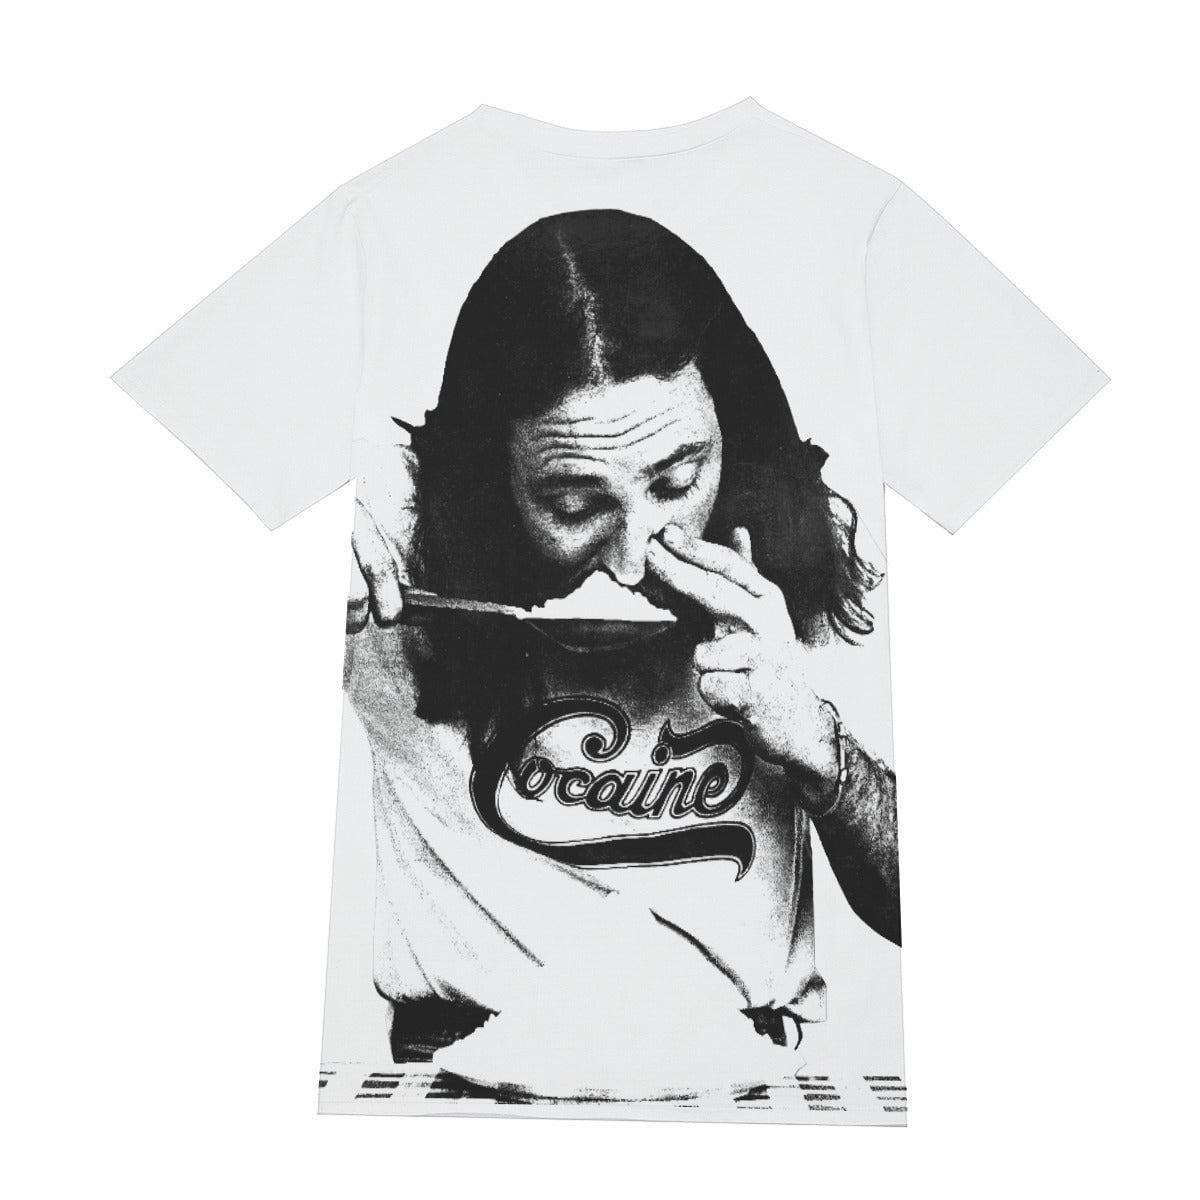 Cocaine Cowboy T-Shirt - Make a Statement with This Edgy Tee